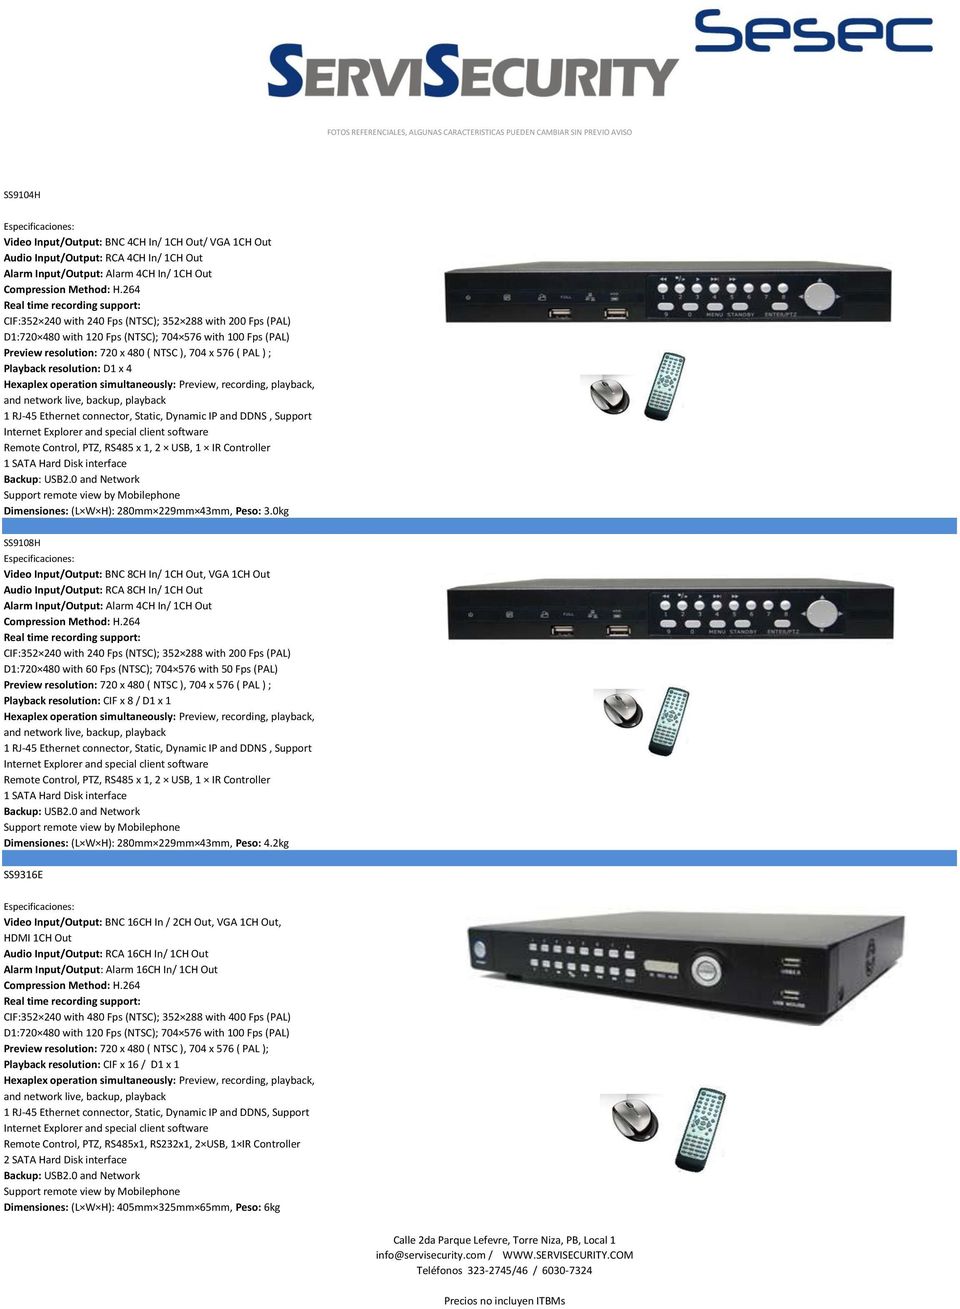 576 ( PAL ) ; Playback resolution: D1 x 4 Hexaplex operation simultaneously: Preview, recording, playback, and network live, backup, playback 1 RJ-45 Ethernet connector, Static, Dynamic IP and DDNS,